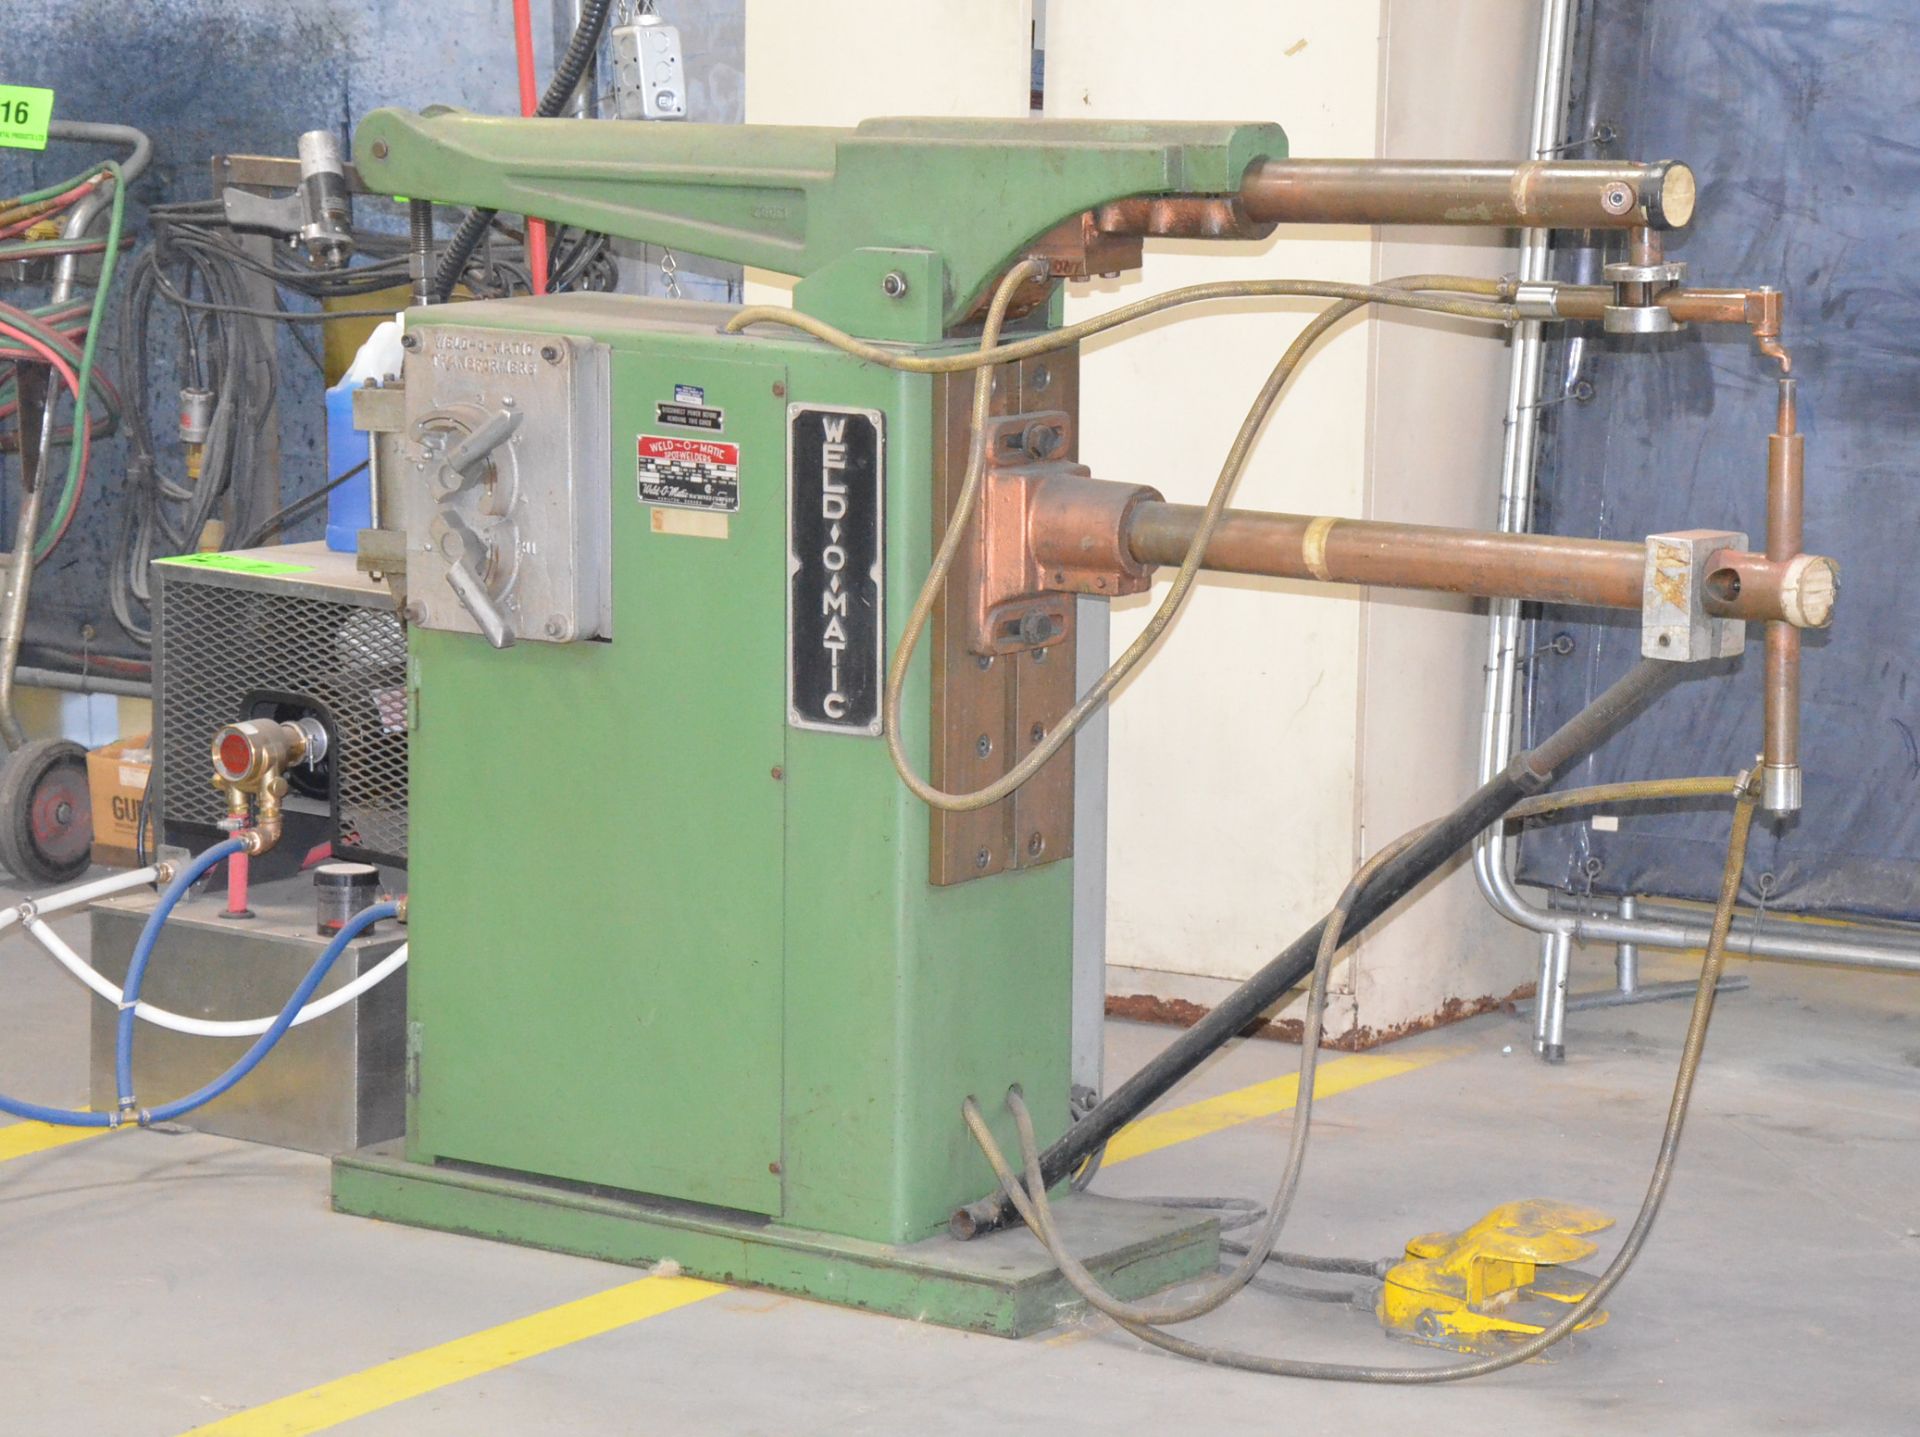 WELD-O-MATIC AF-2B FLOOR-TYPE SPOT WELDER WITH 50 KVA, 35" THROAT, MEDWELD 300S CONTROL, 575V/1PH/ - Image 2 of 4